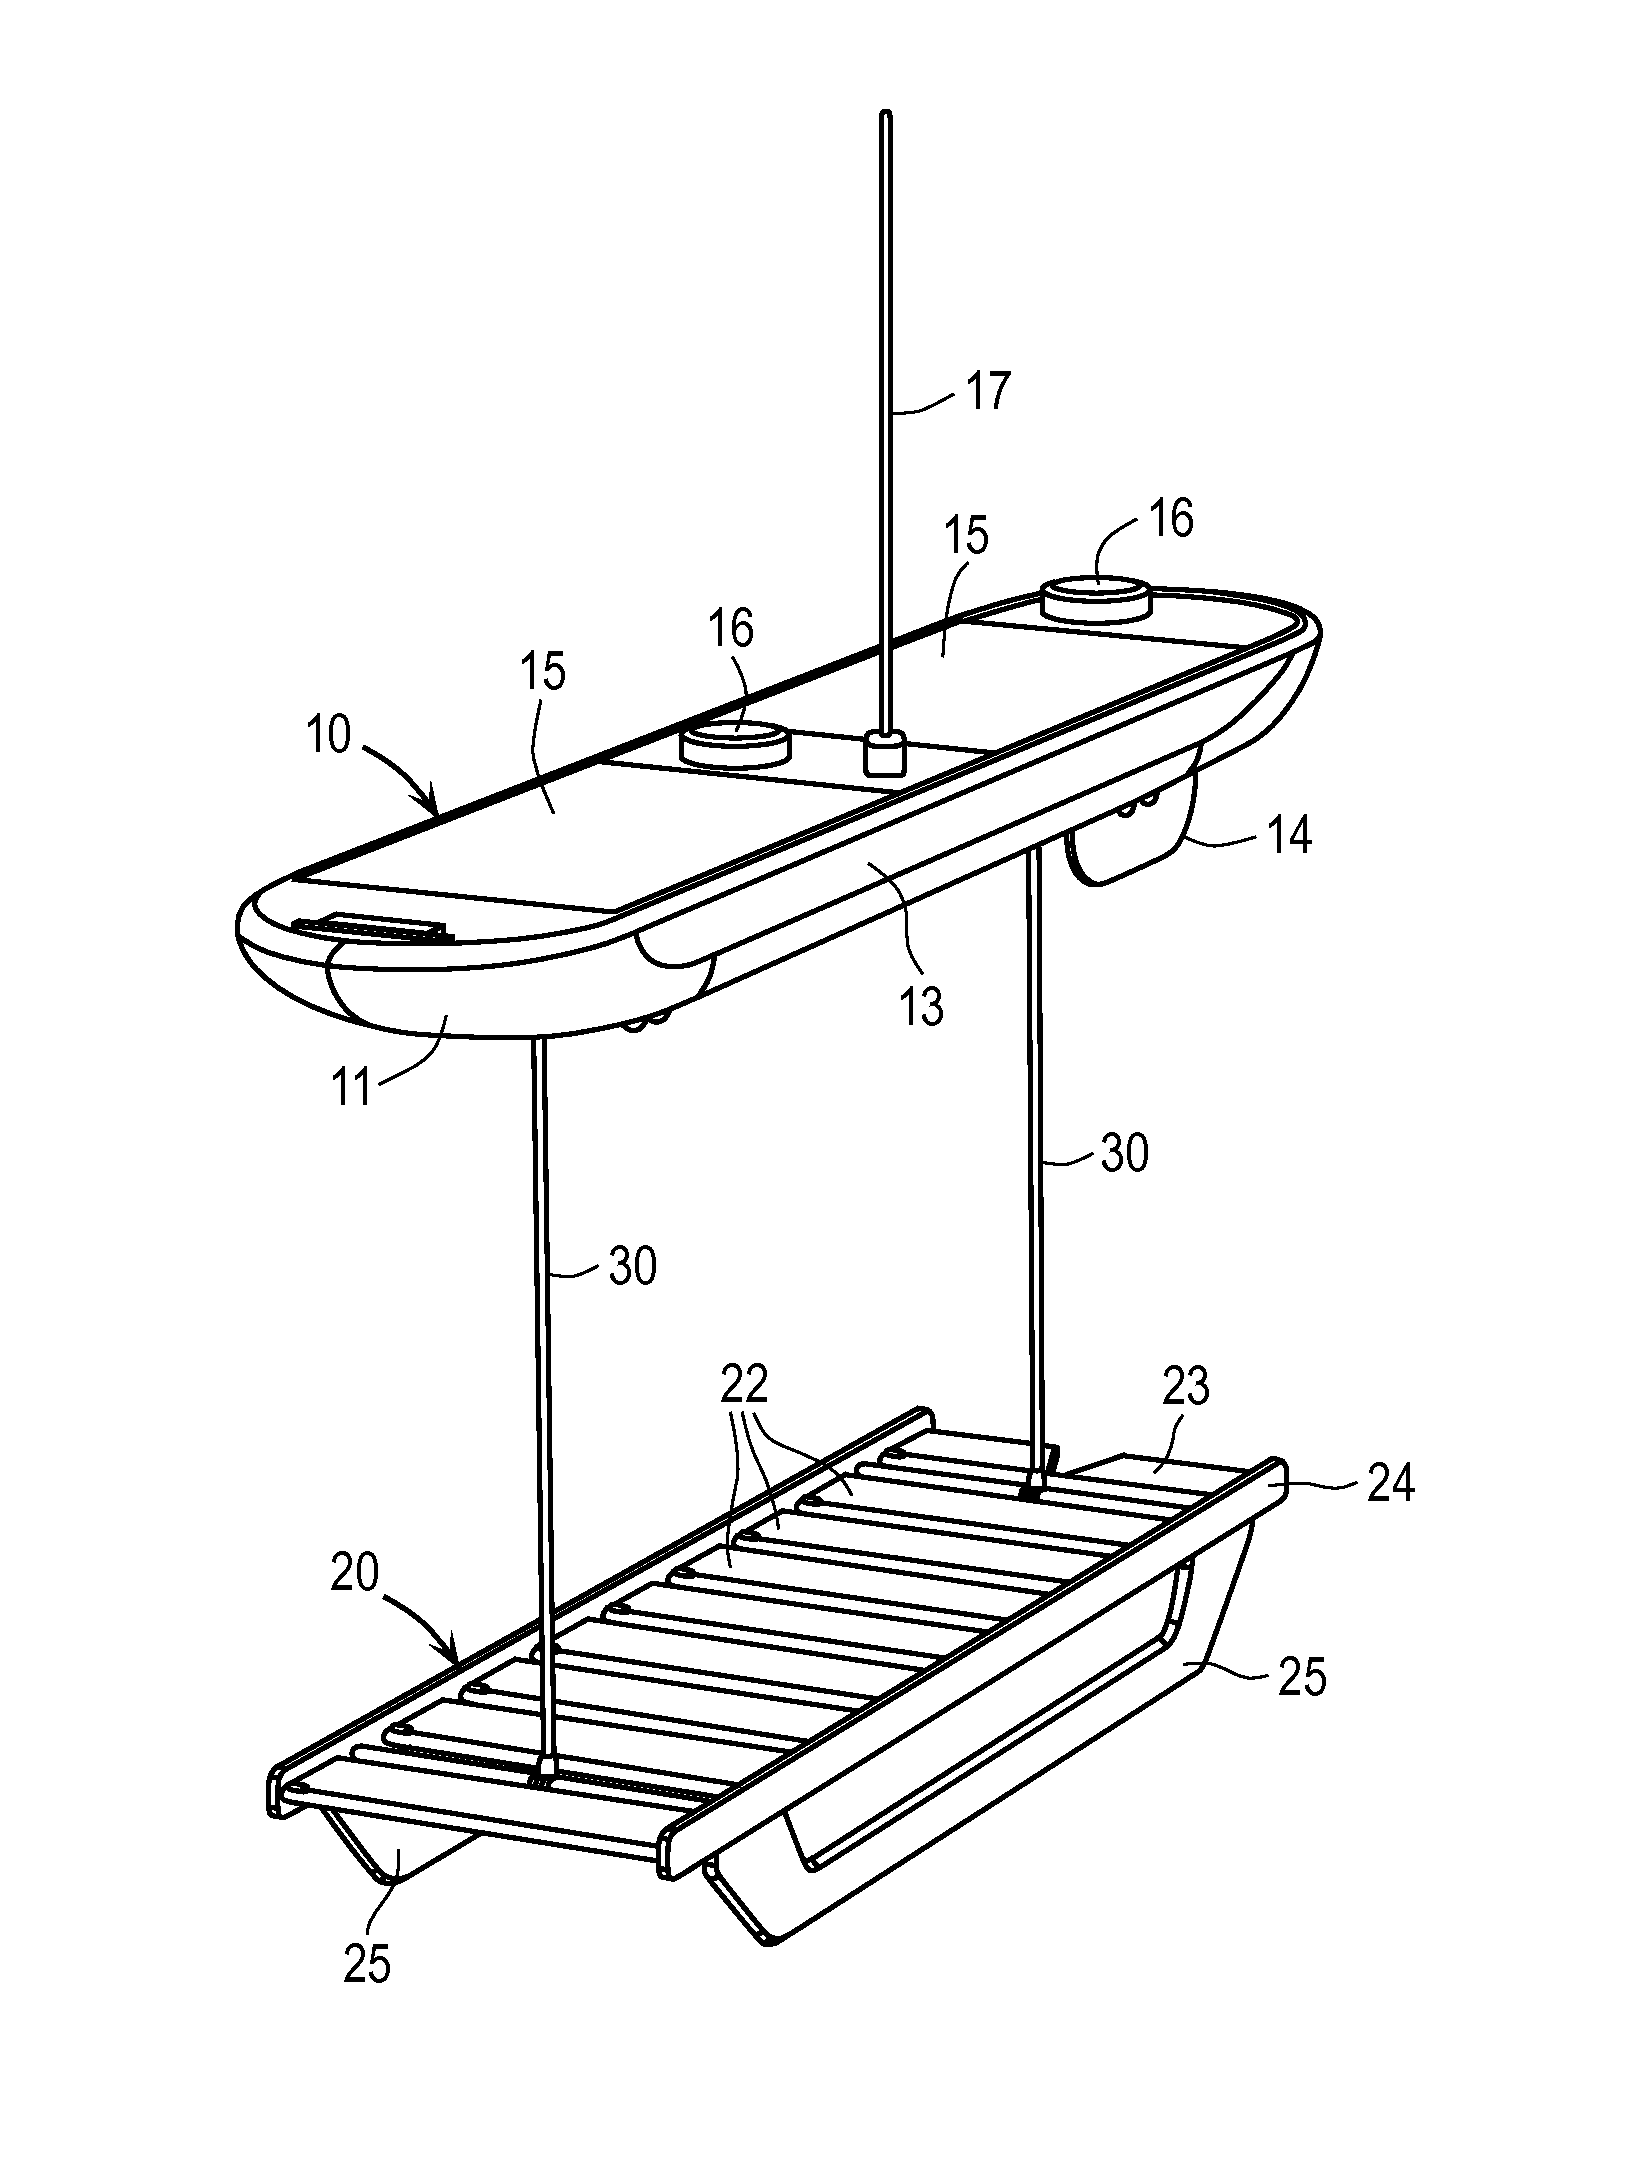 Wave-powered devices configured for nesting